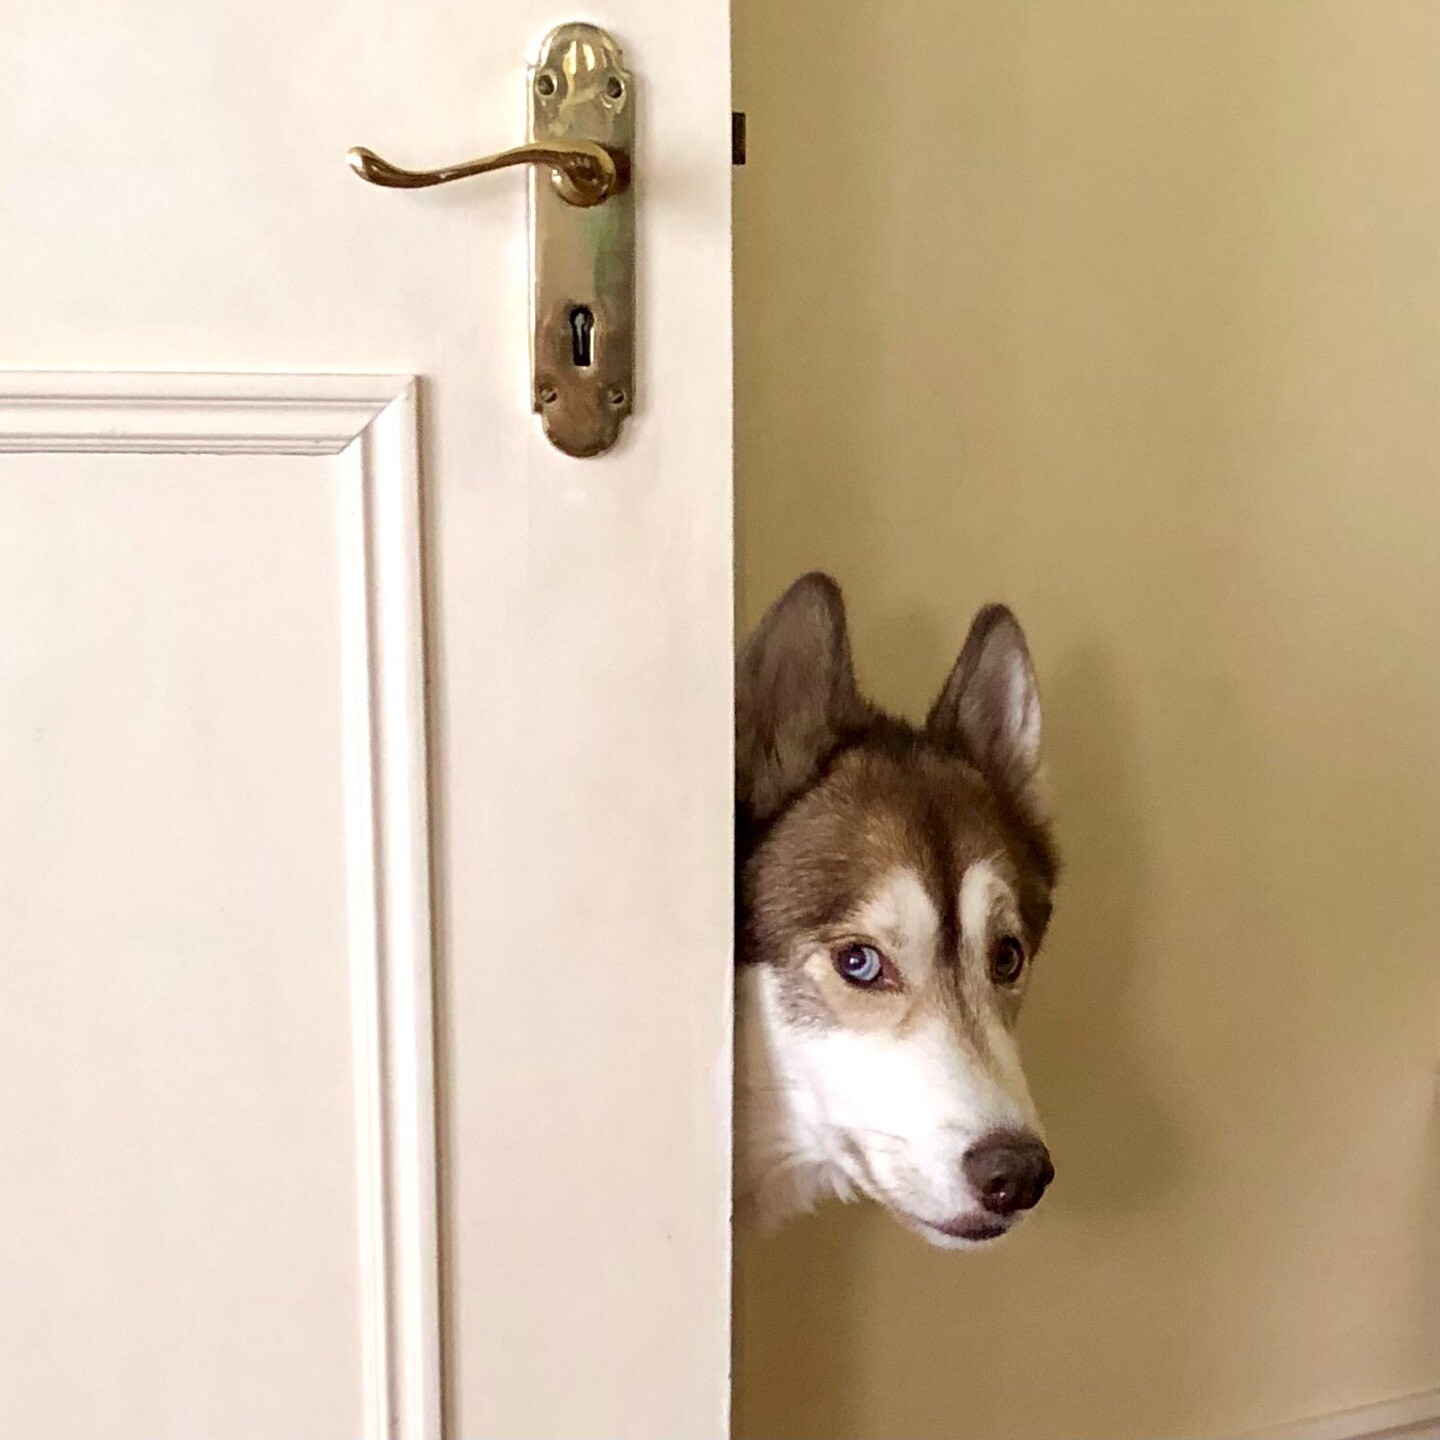 Osky the husky-mix dog peering around a door with a cheeky look on his face.